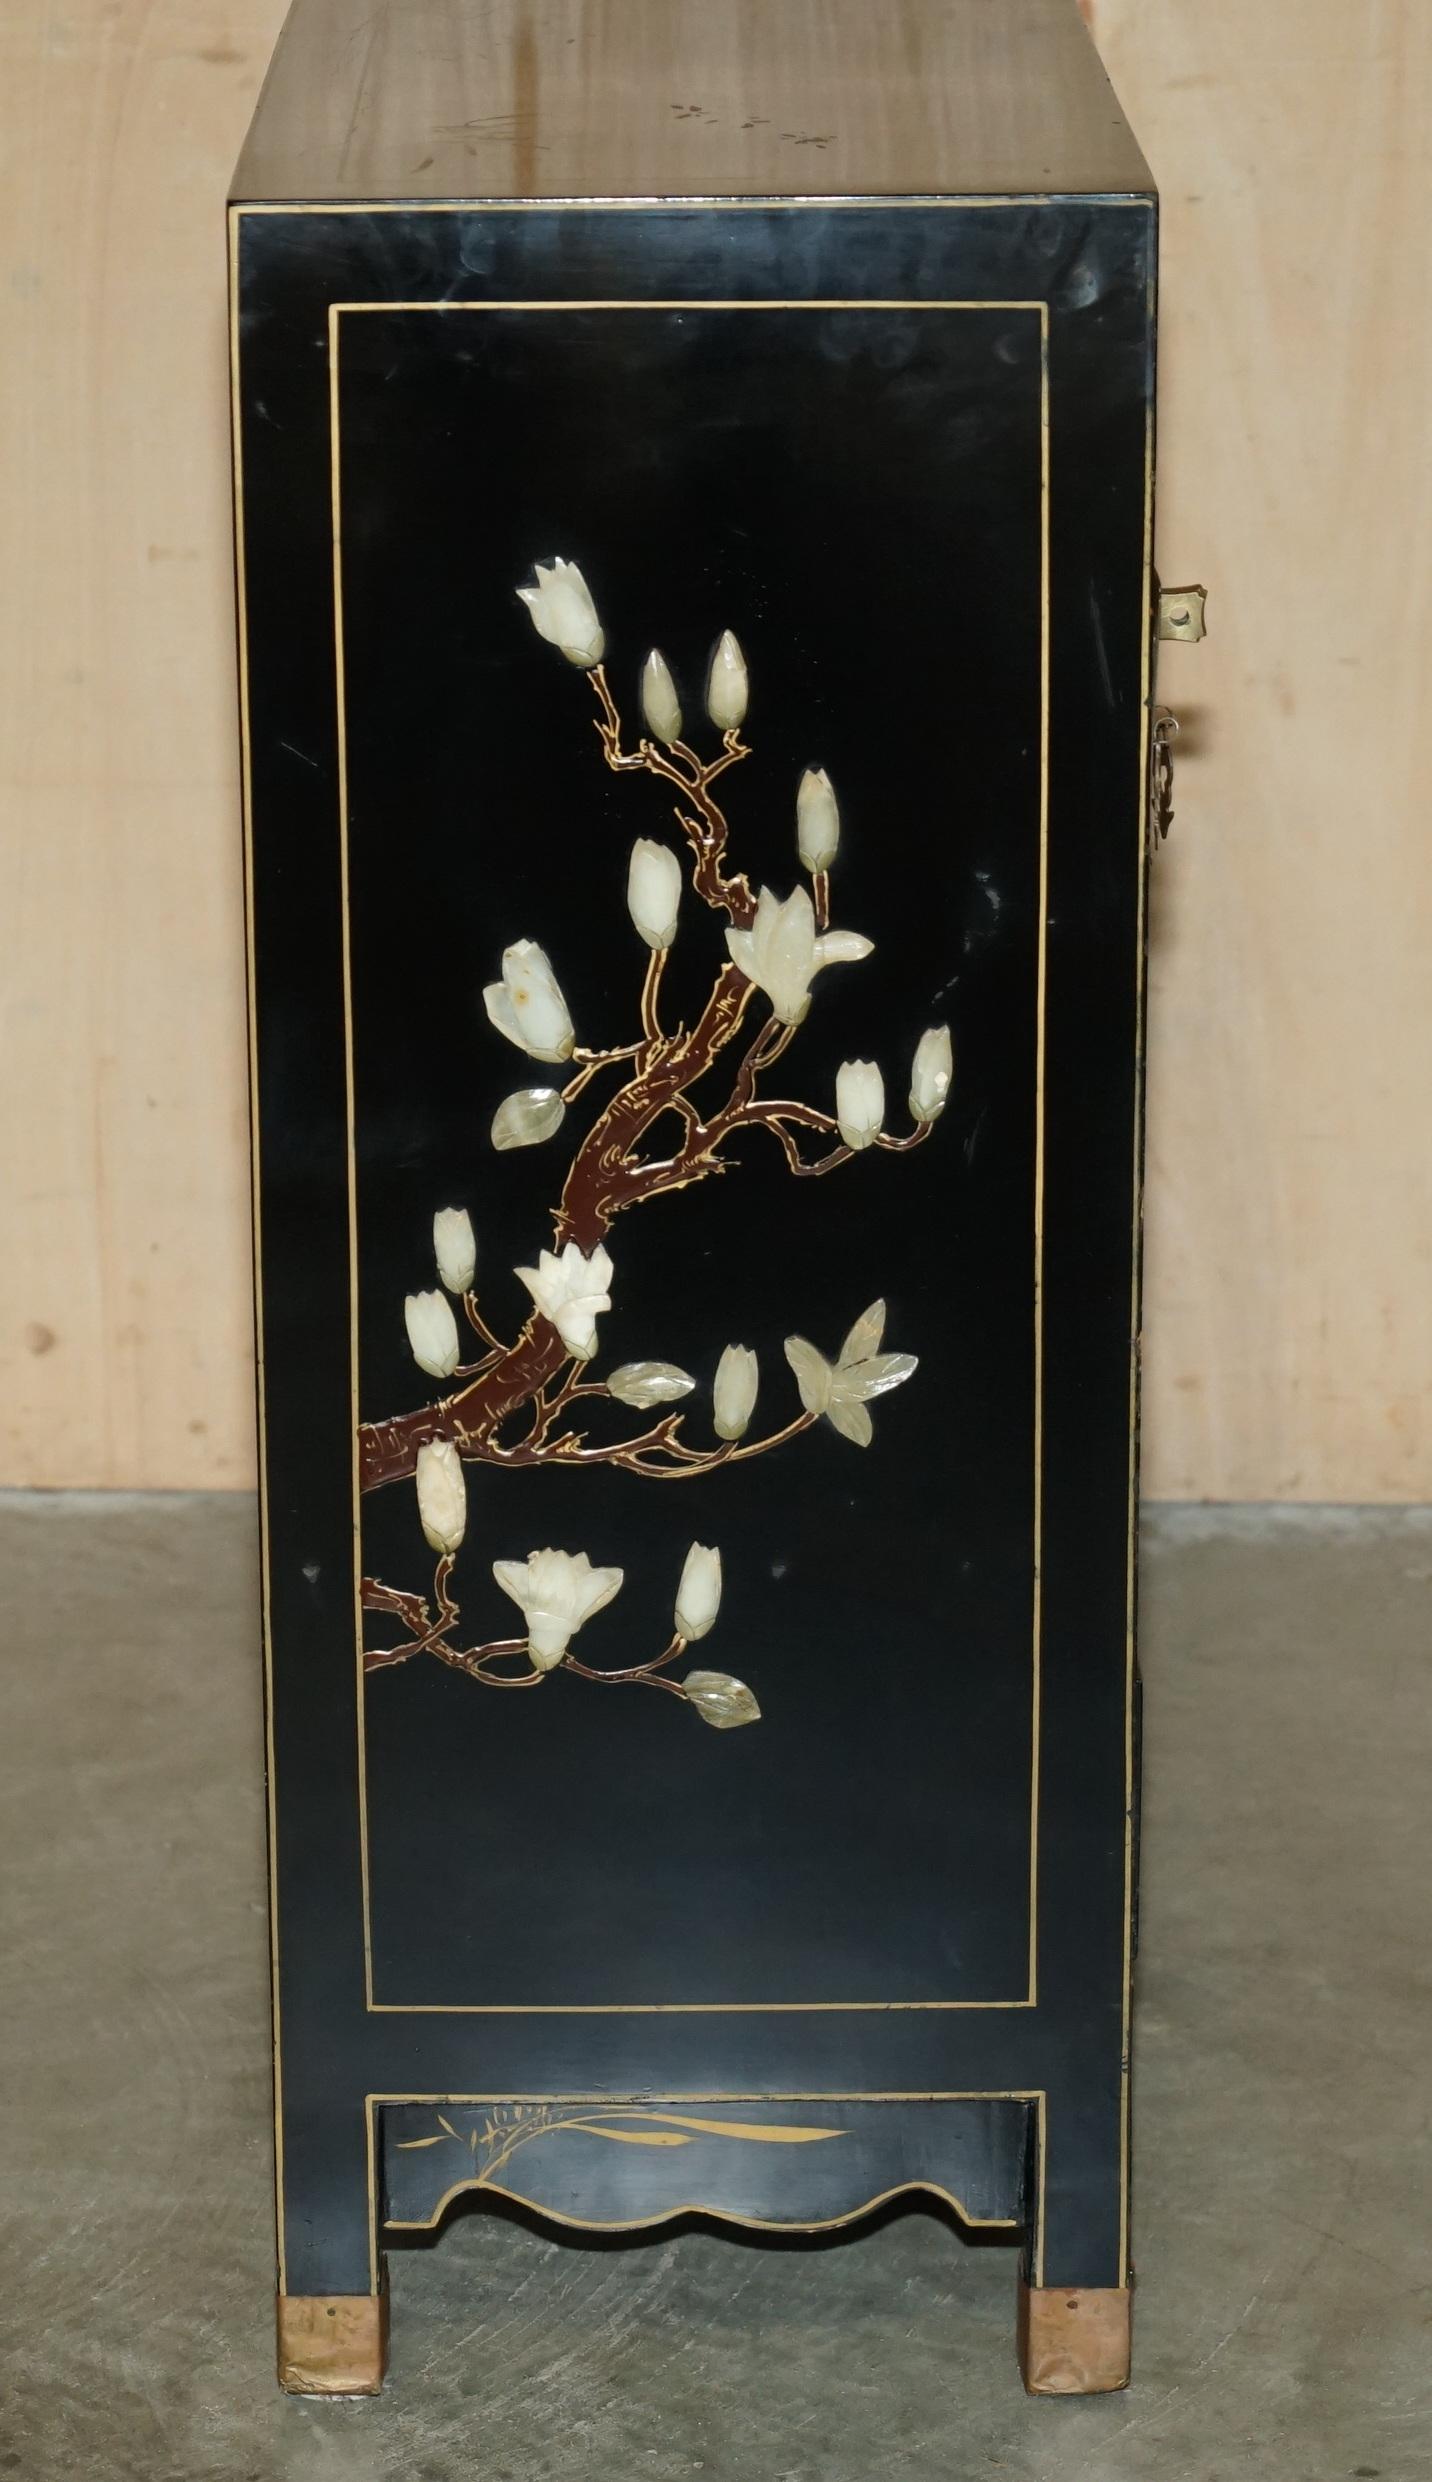 LOVELY ViNTAGE CHINESE CHINOISERIE SAMURAI WARRIOR LACQUER SIDE CABINET SOAPSTON im Angebot 2